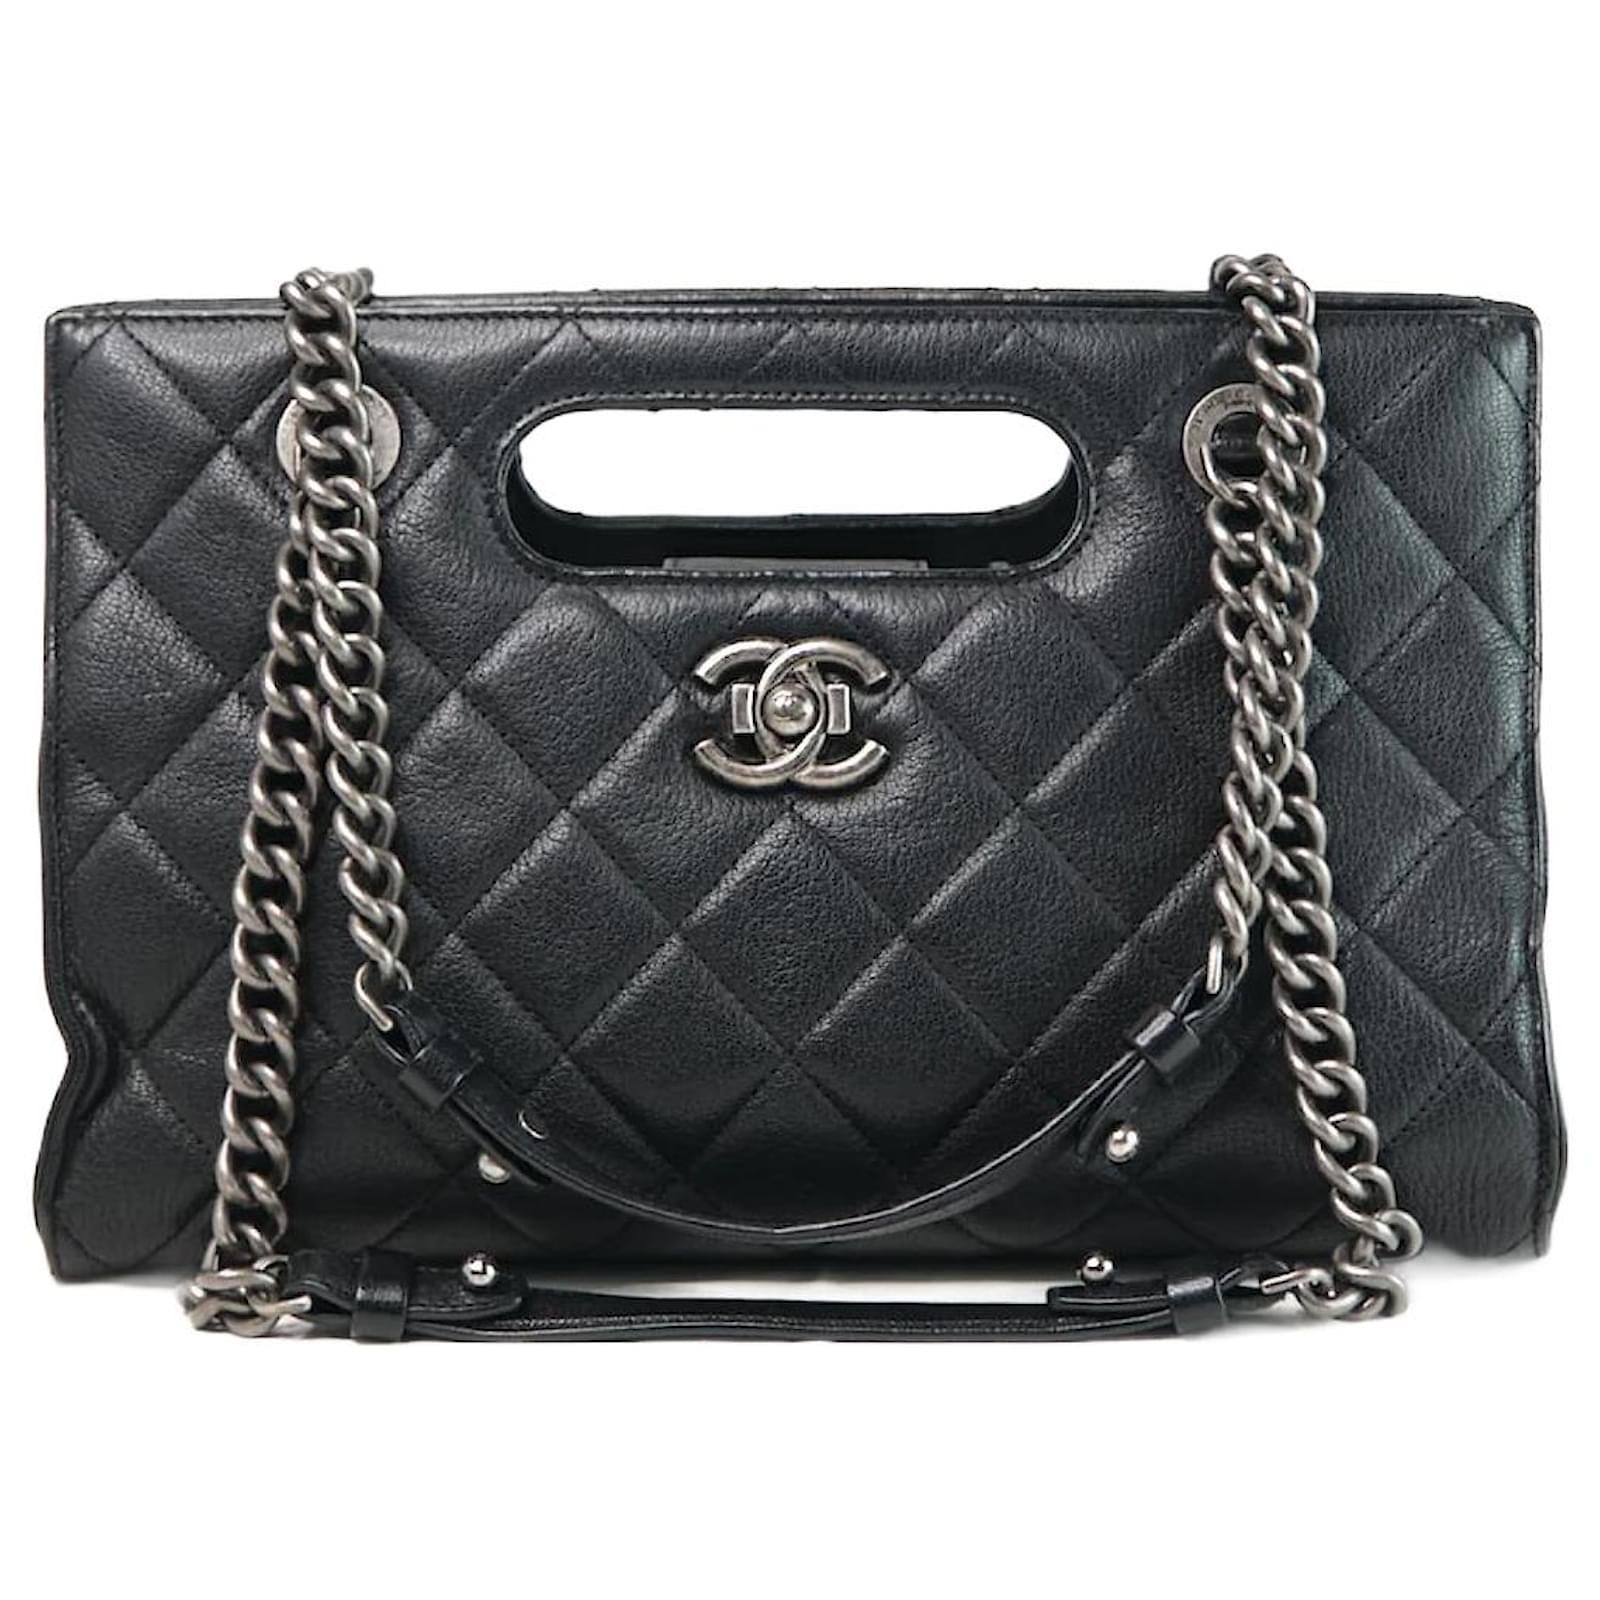 Chanel CC Quilted Leather Shoulder Bag Black Pony-style calfskin